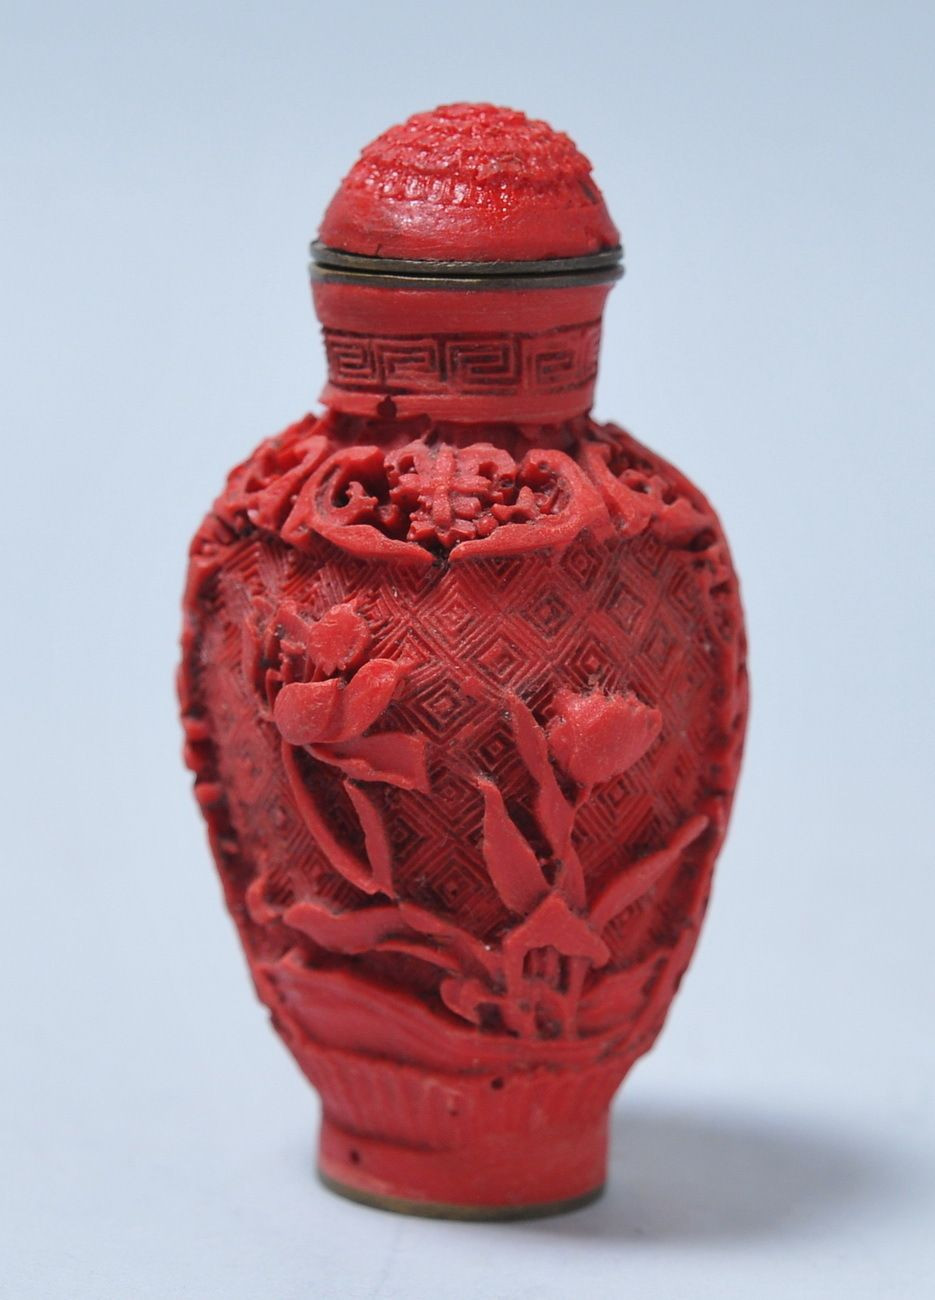 16 Popular Lalique Vases On Ebay 2024 free download lalique vases on ebay of signed 1940 chinese republic antique snuff bottle cinnabar carving within signed 1940 chinese republic antique snuff bottle cinnabar carving perfume flask ebay antiq